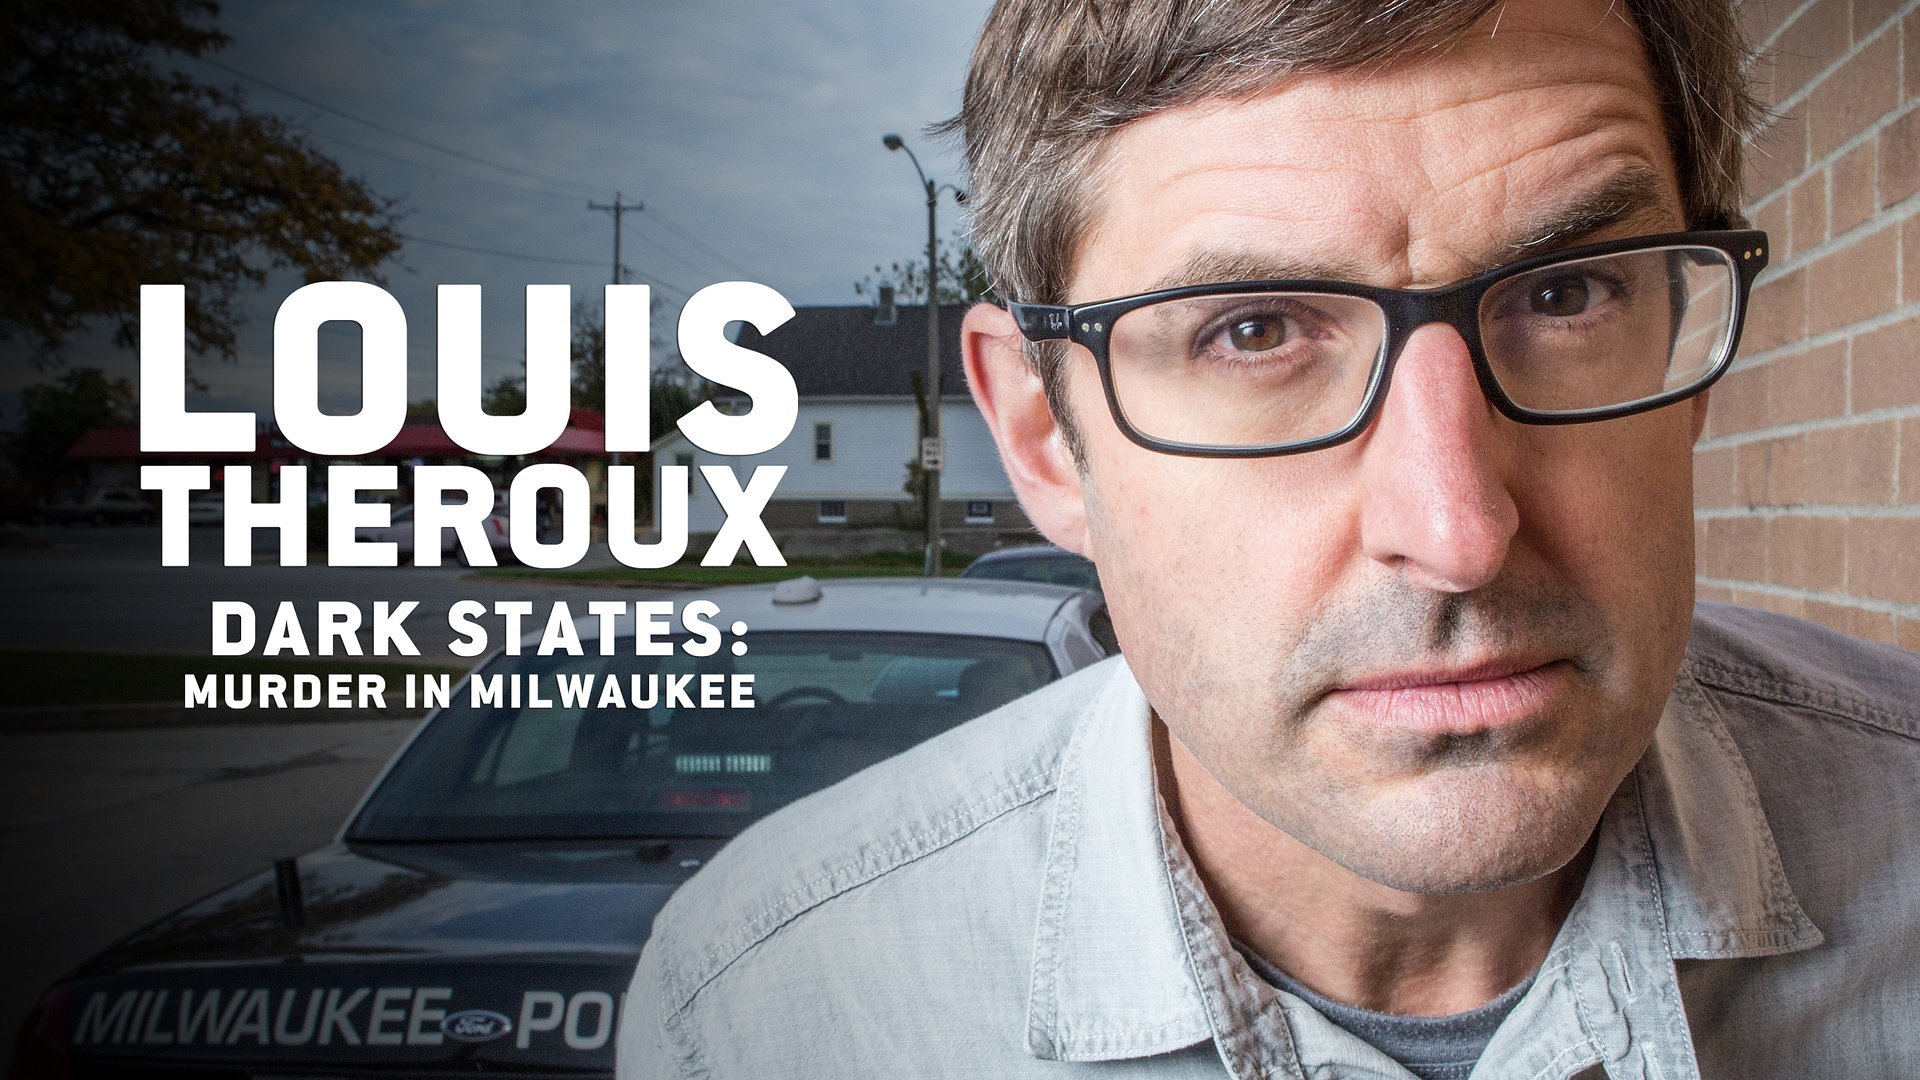 Louis Theroux: Mørke stater - mord i Milwaukee